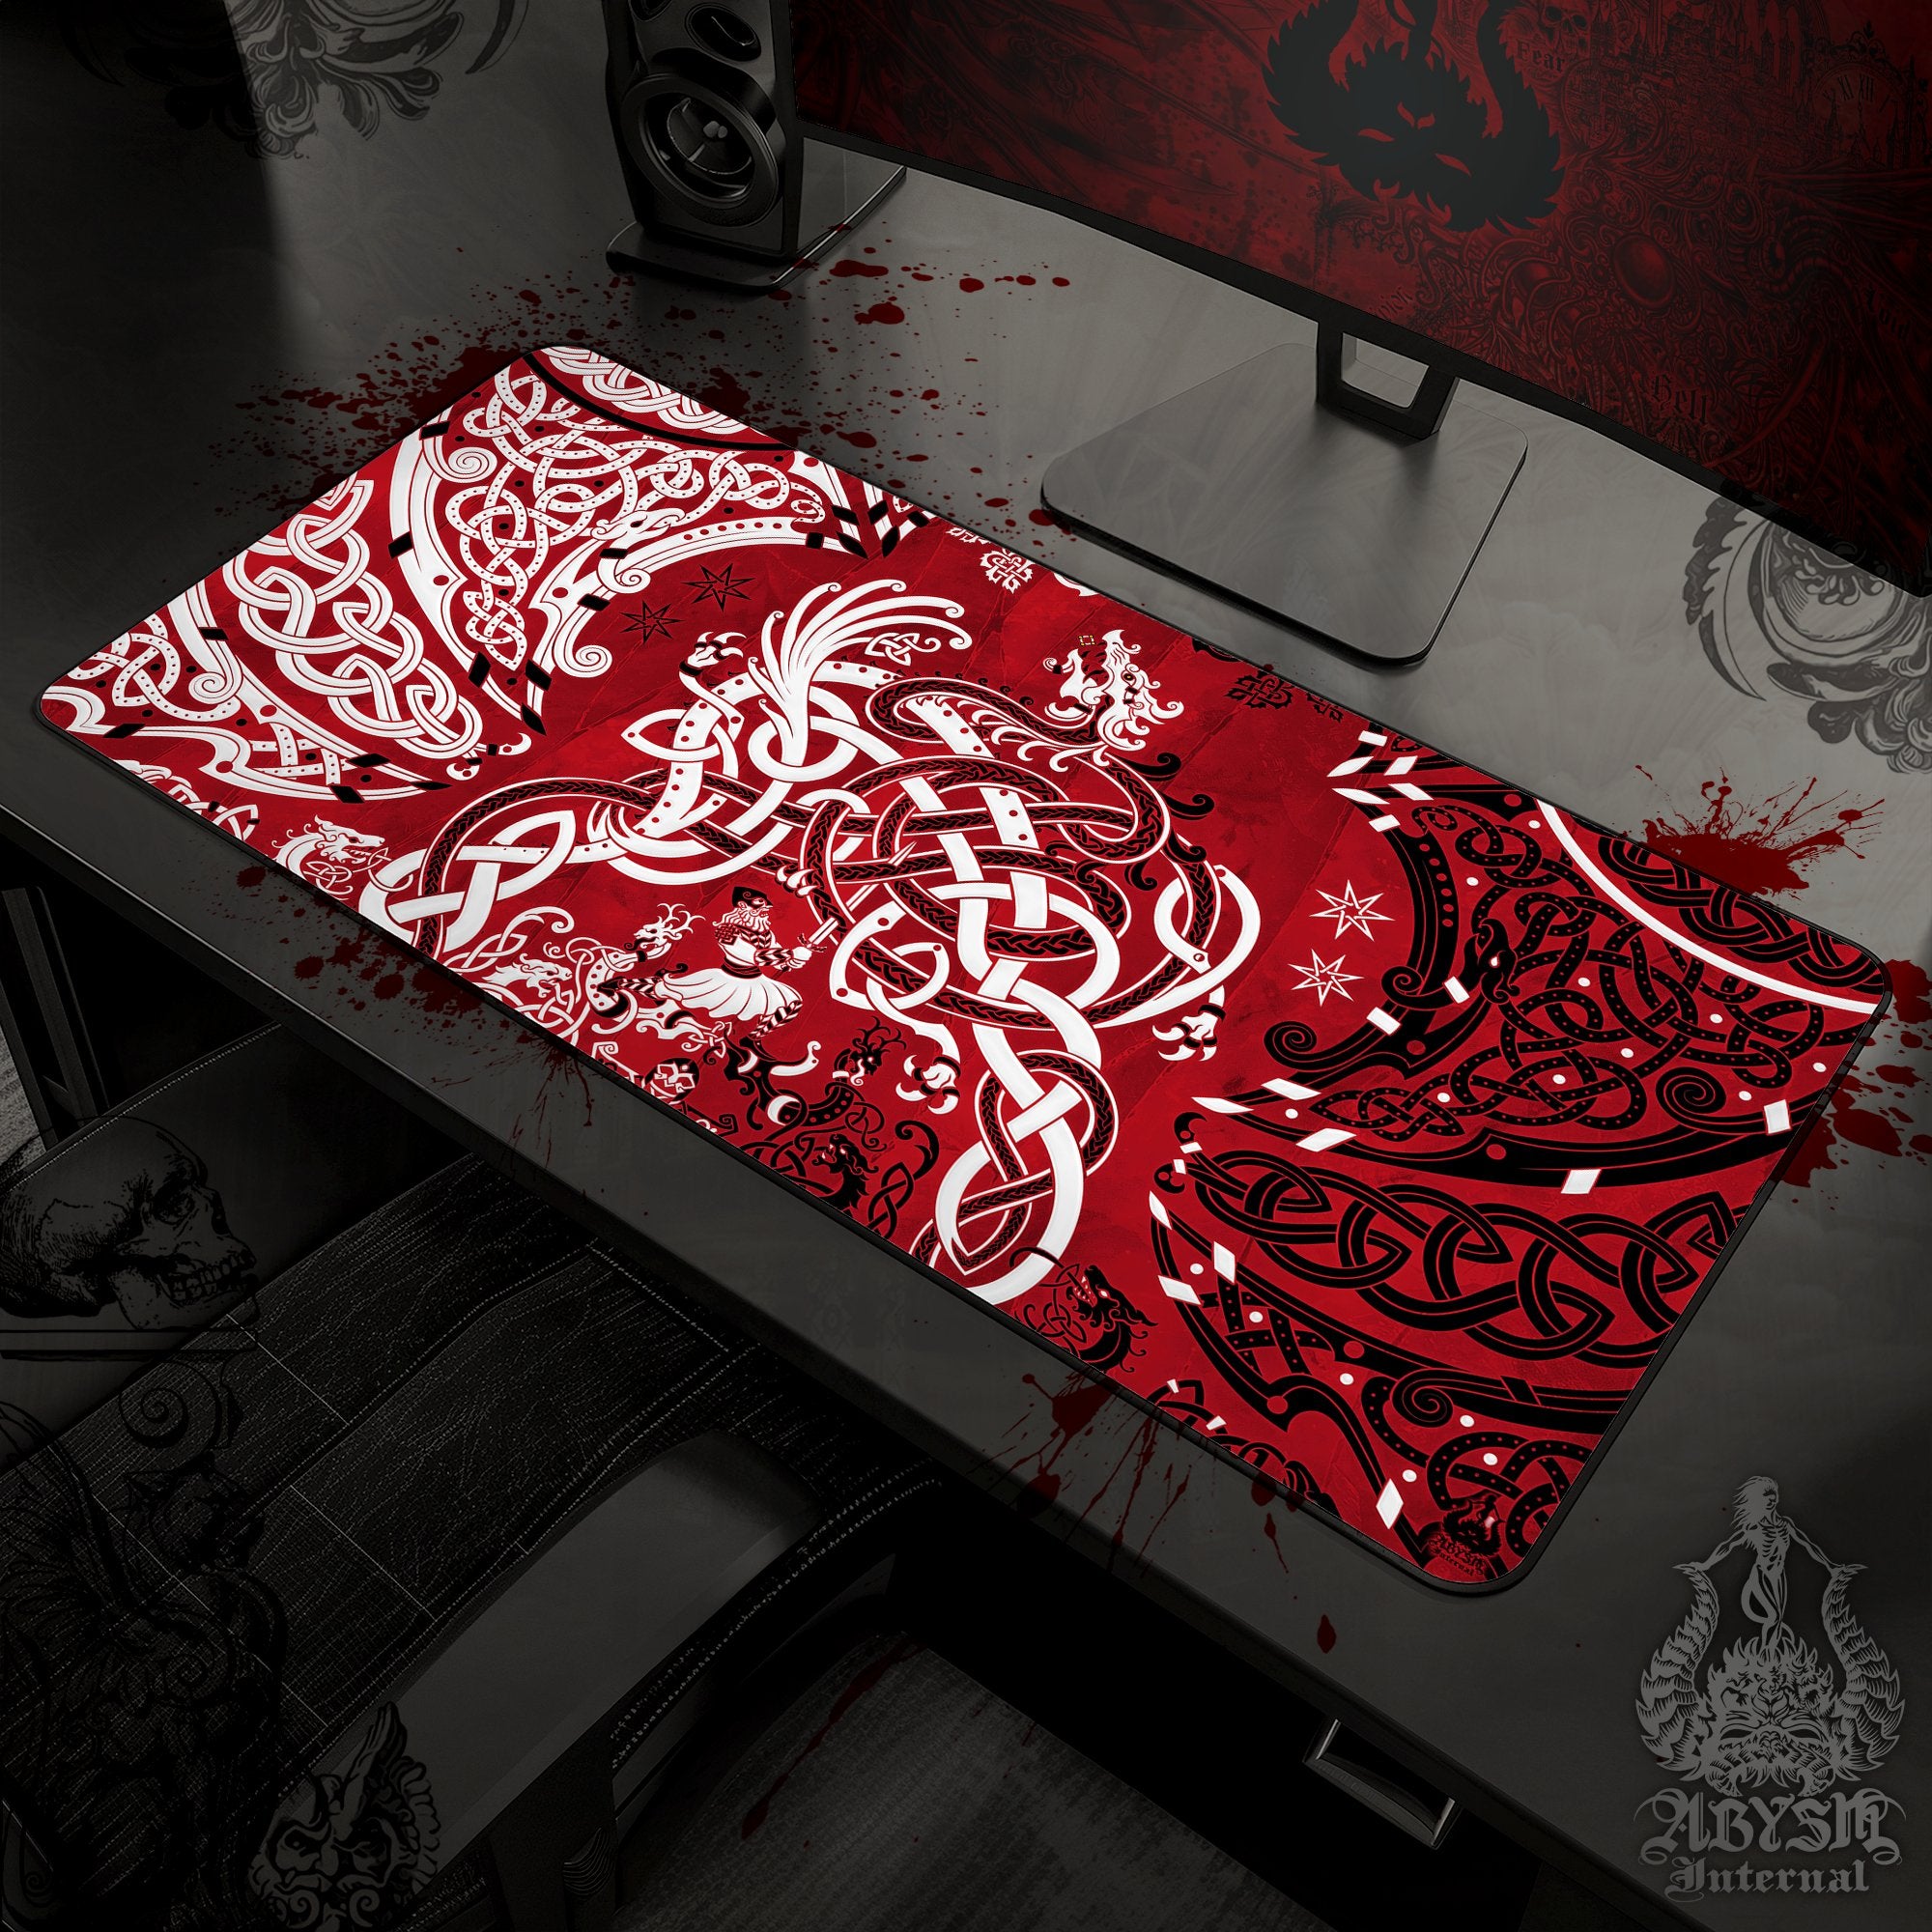 Viking Gaming Desk Mat, Norse Dragon Mouse Pad, Nordic Knotwork Table Protector Cover, Fafnir Workpad, Art Print - Bloody Red - Abysm Internal